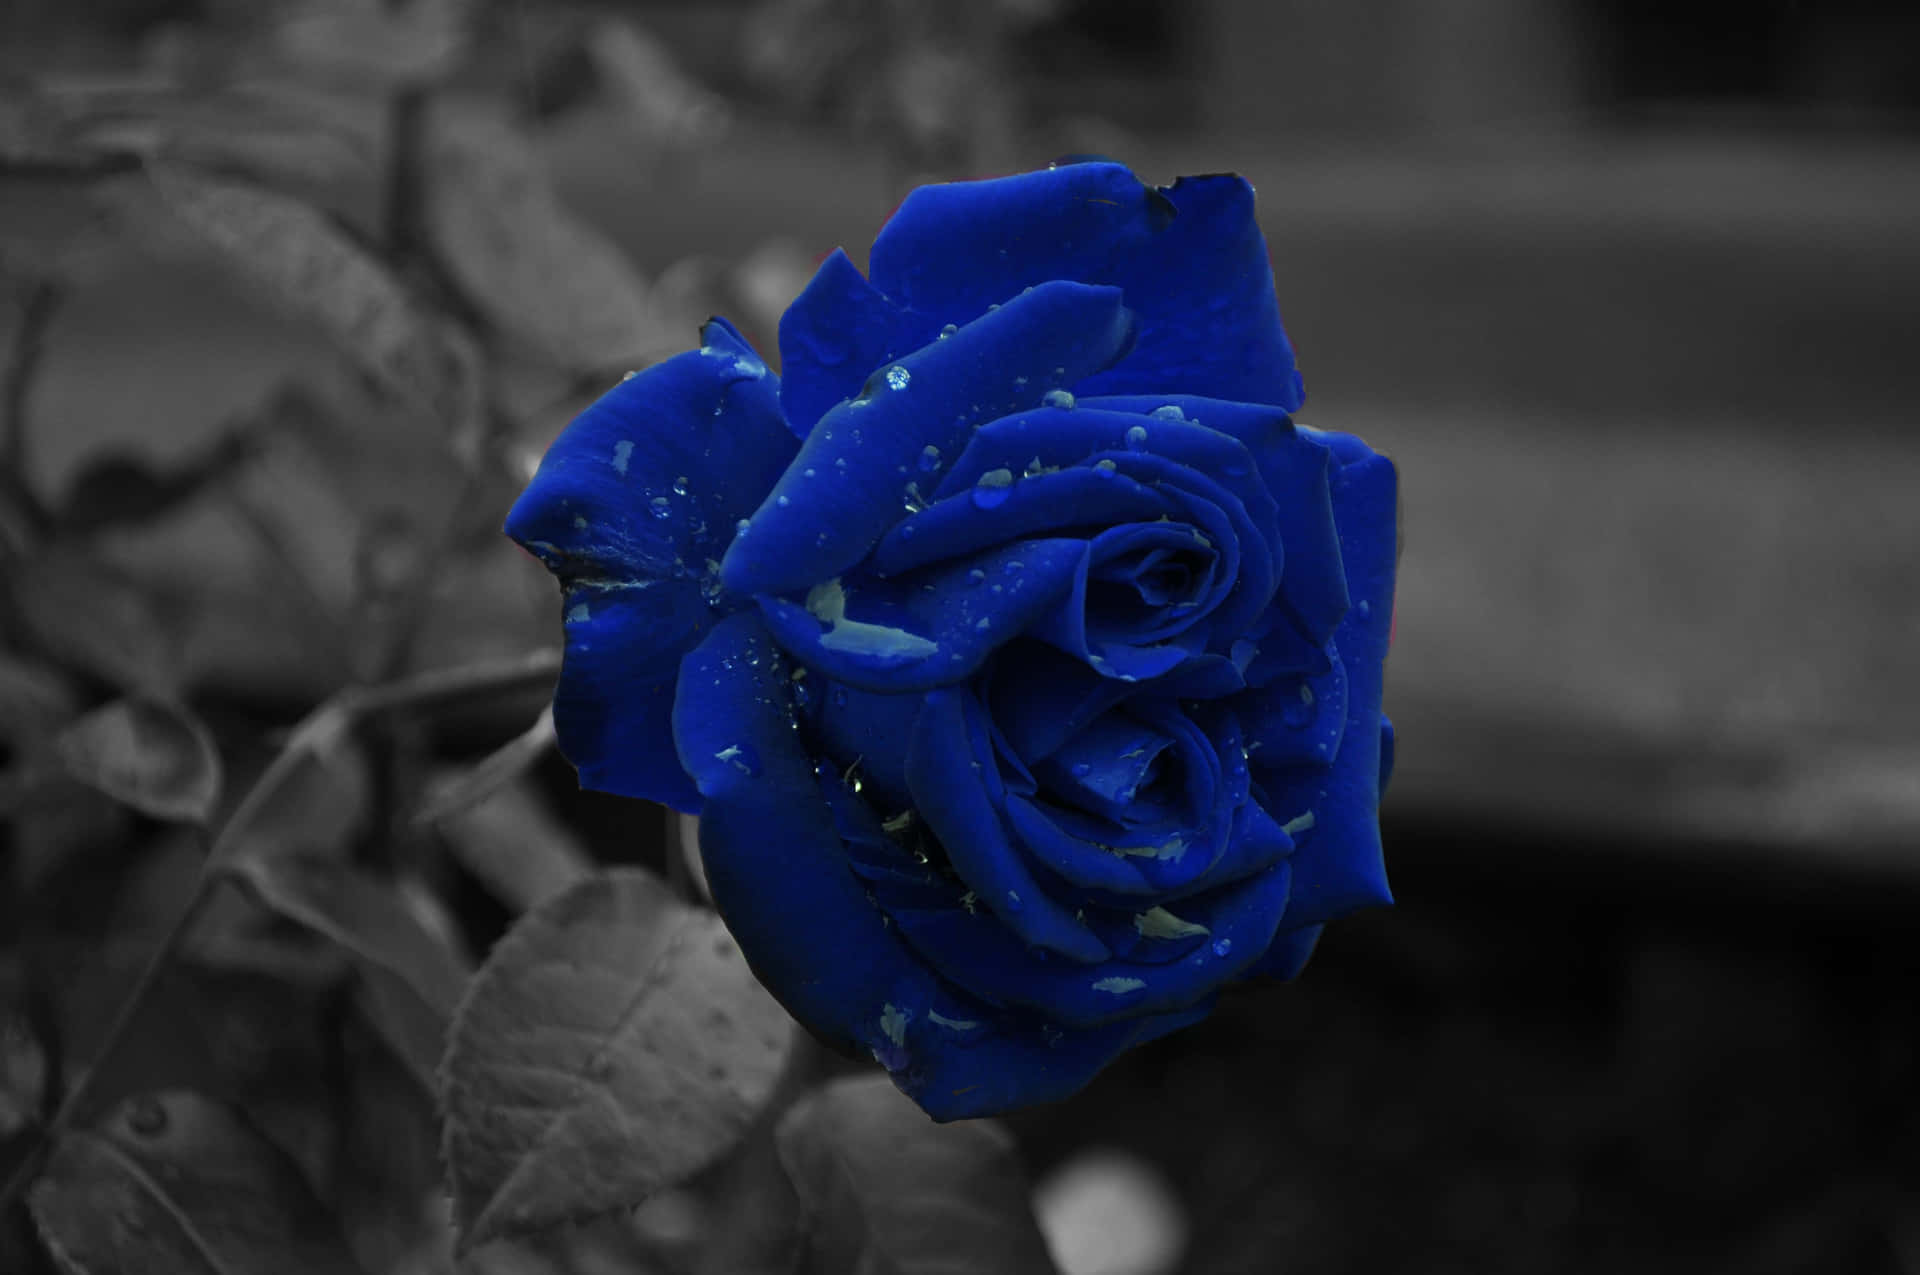 "The perfect symbol of love with a Blue Rose" Wallpaper